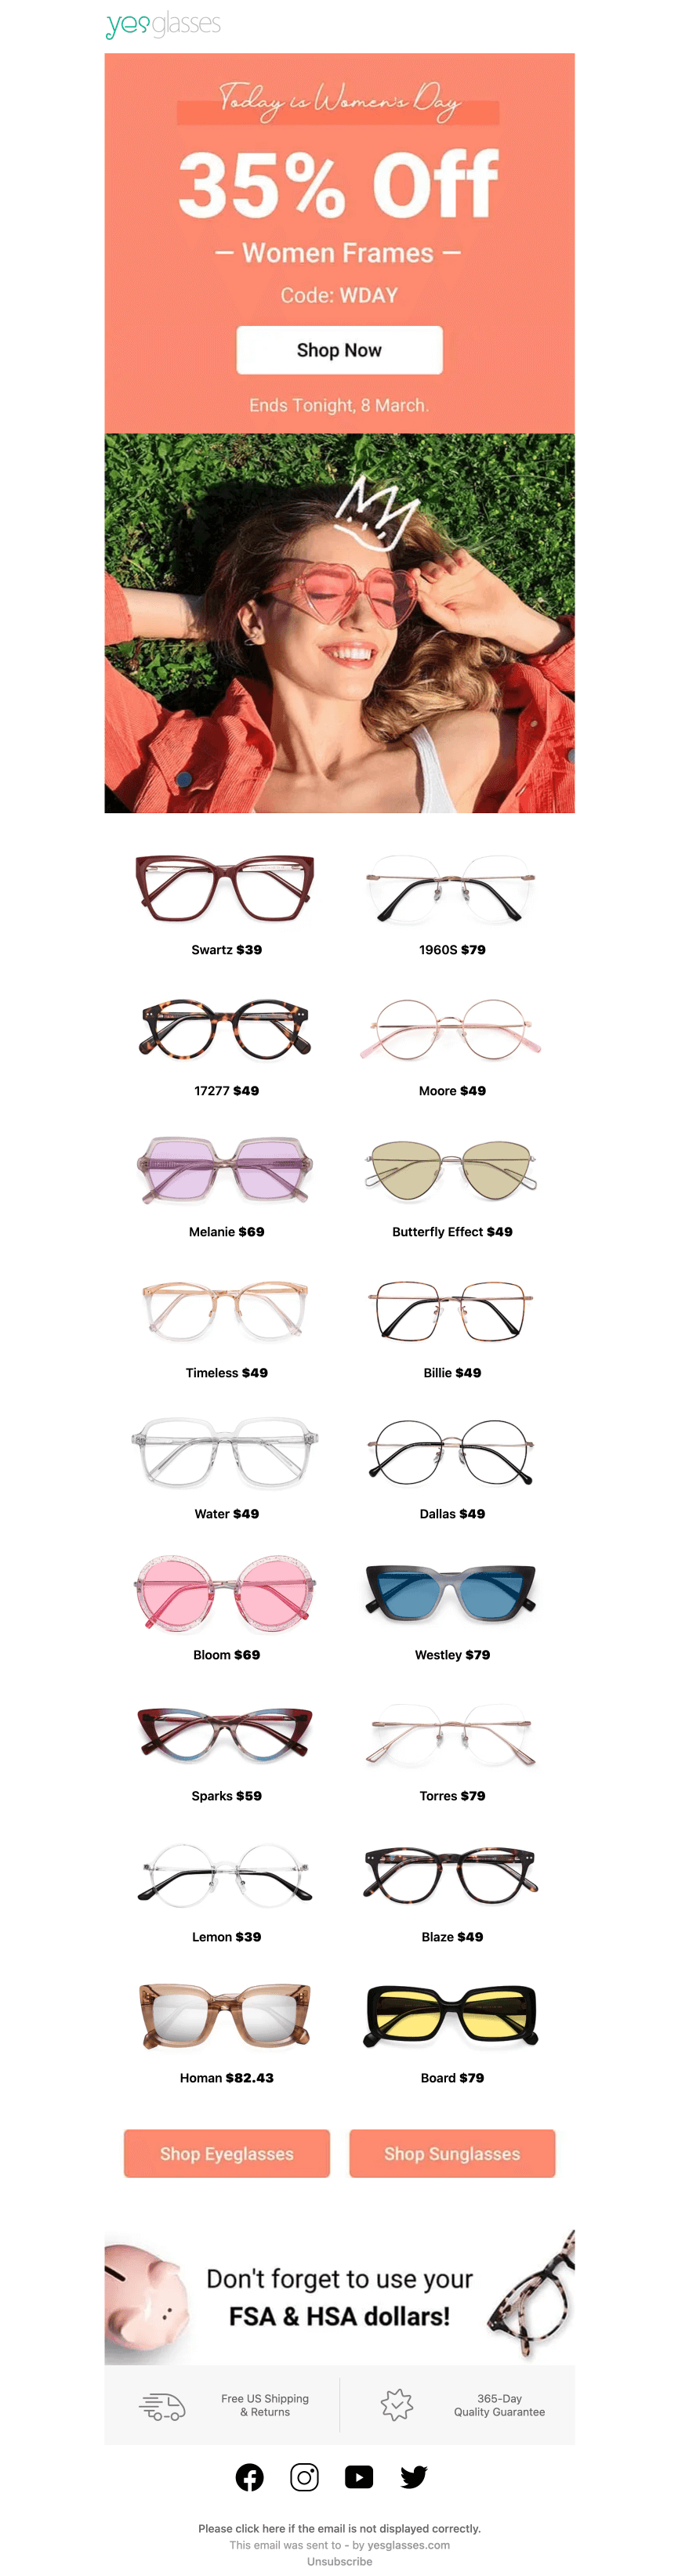 Yesglasses’s International Women’s Day sale email campaign